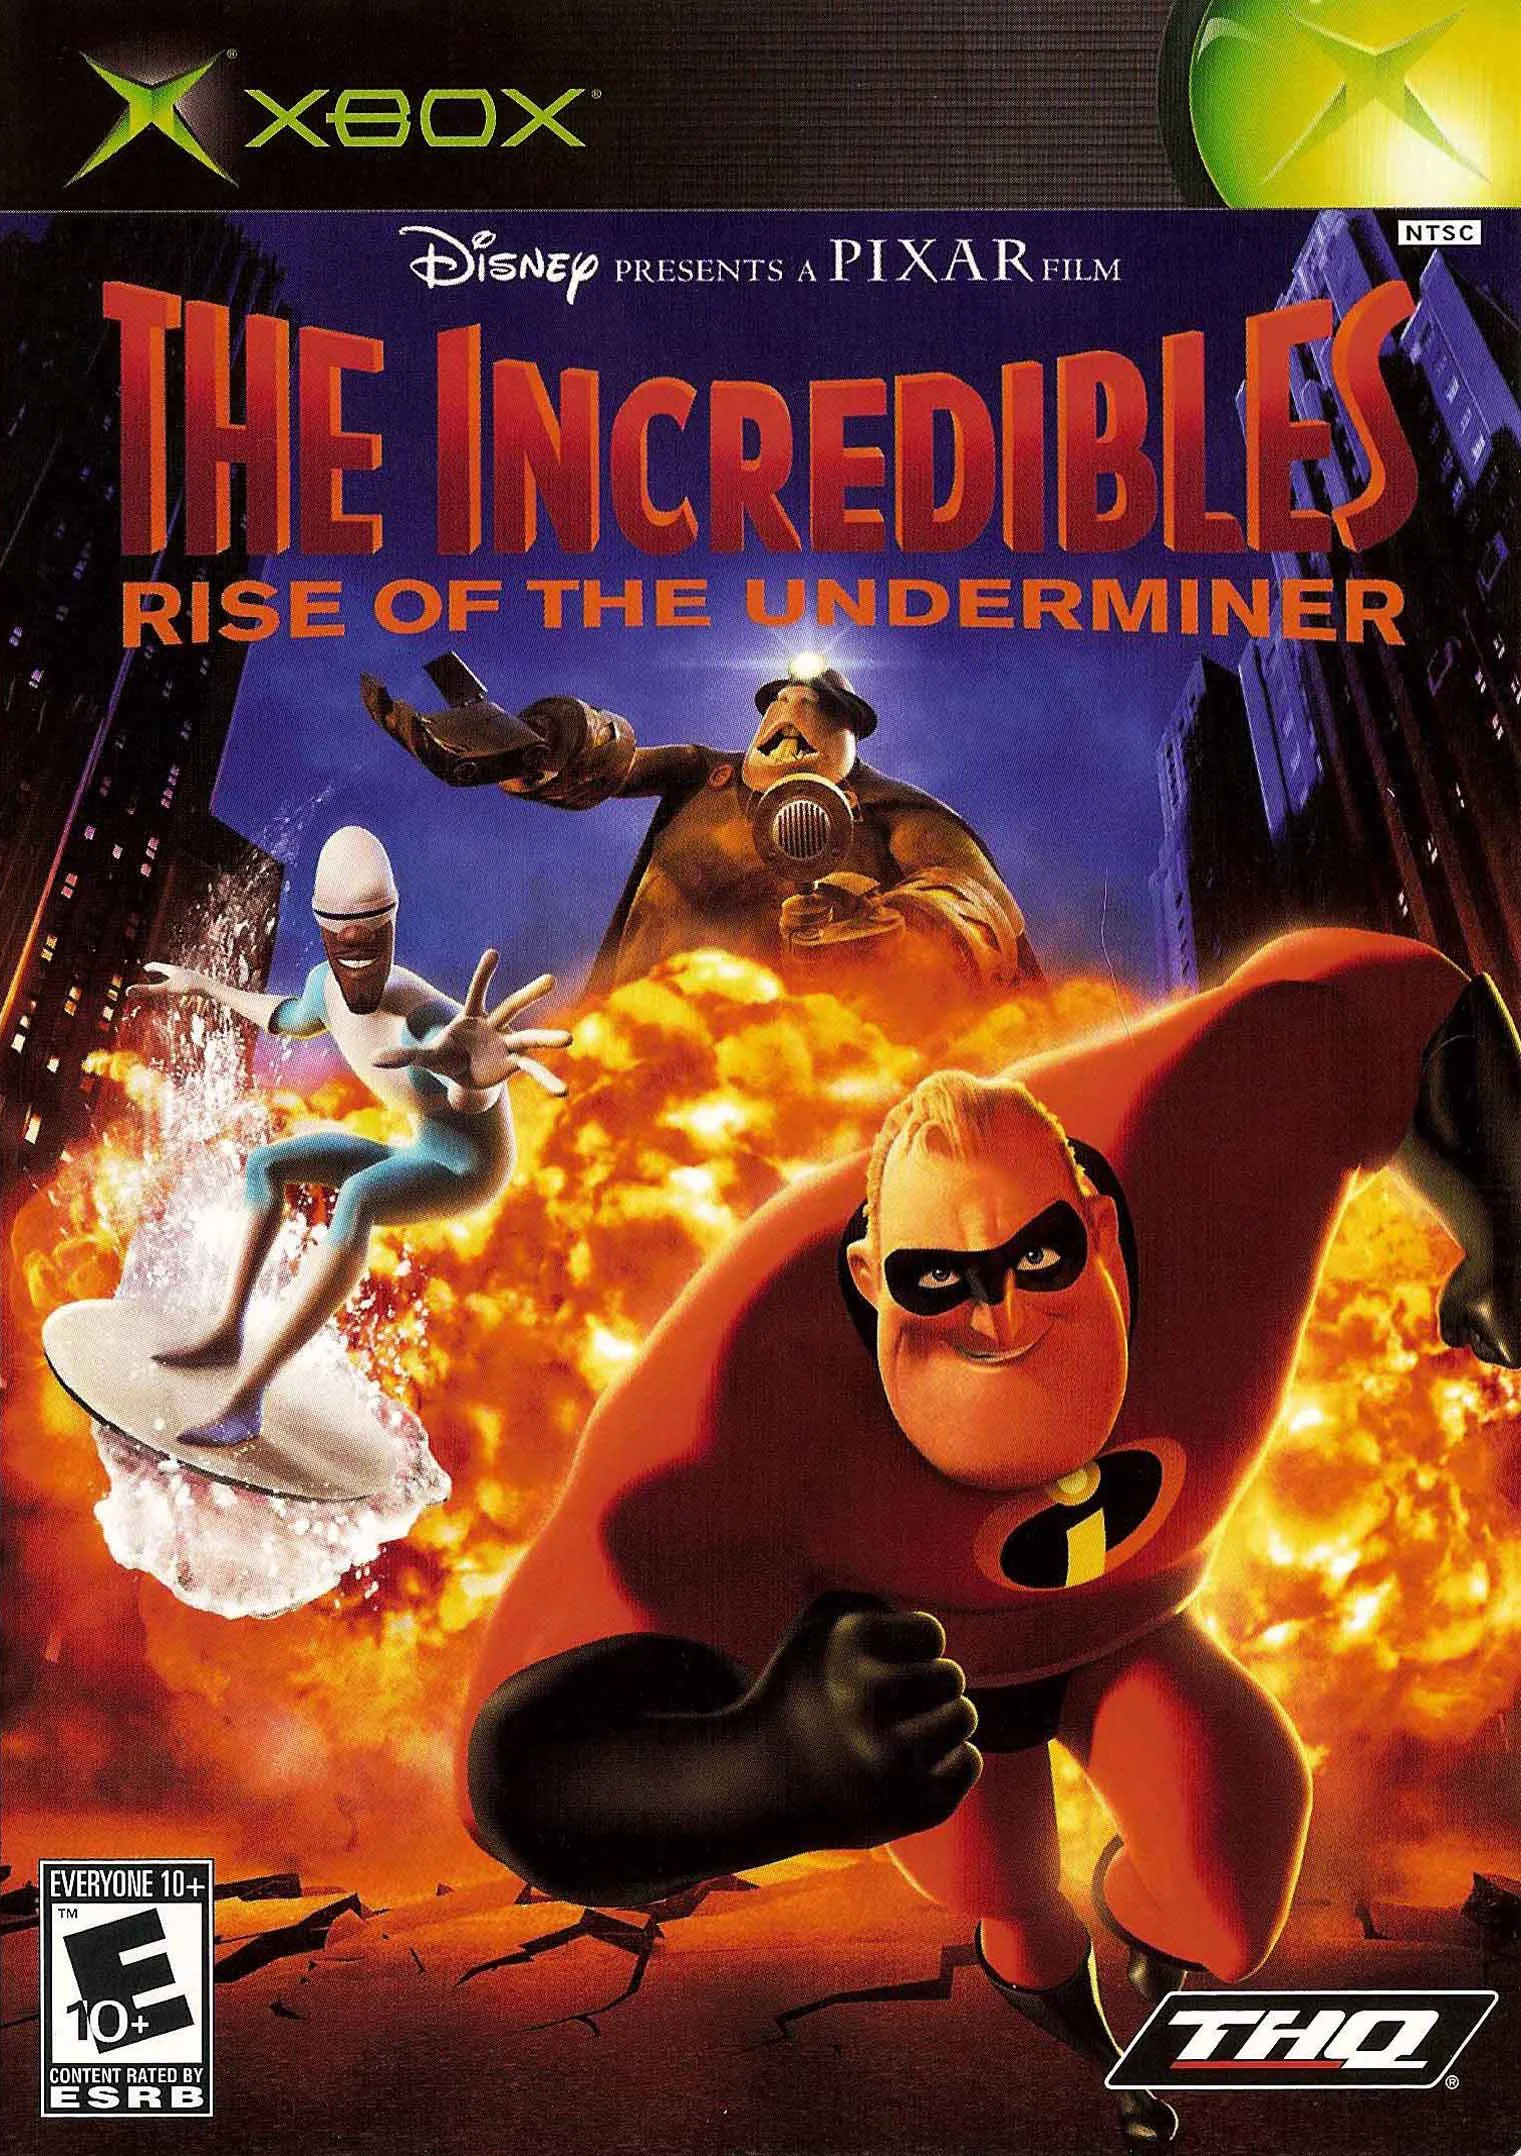 The Incredibles: Rise of the Underminer